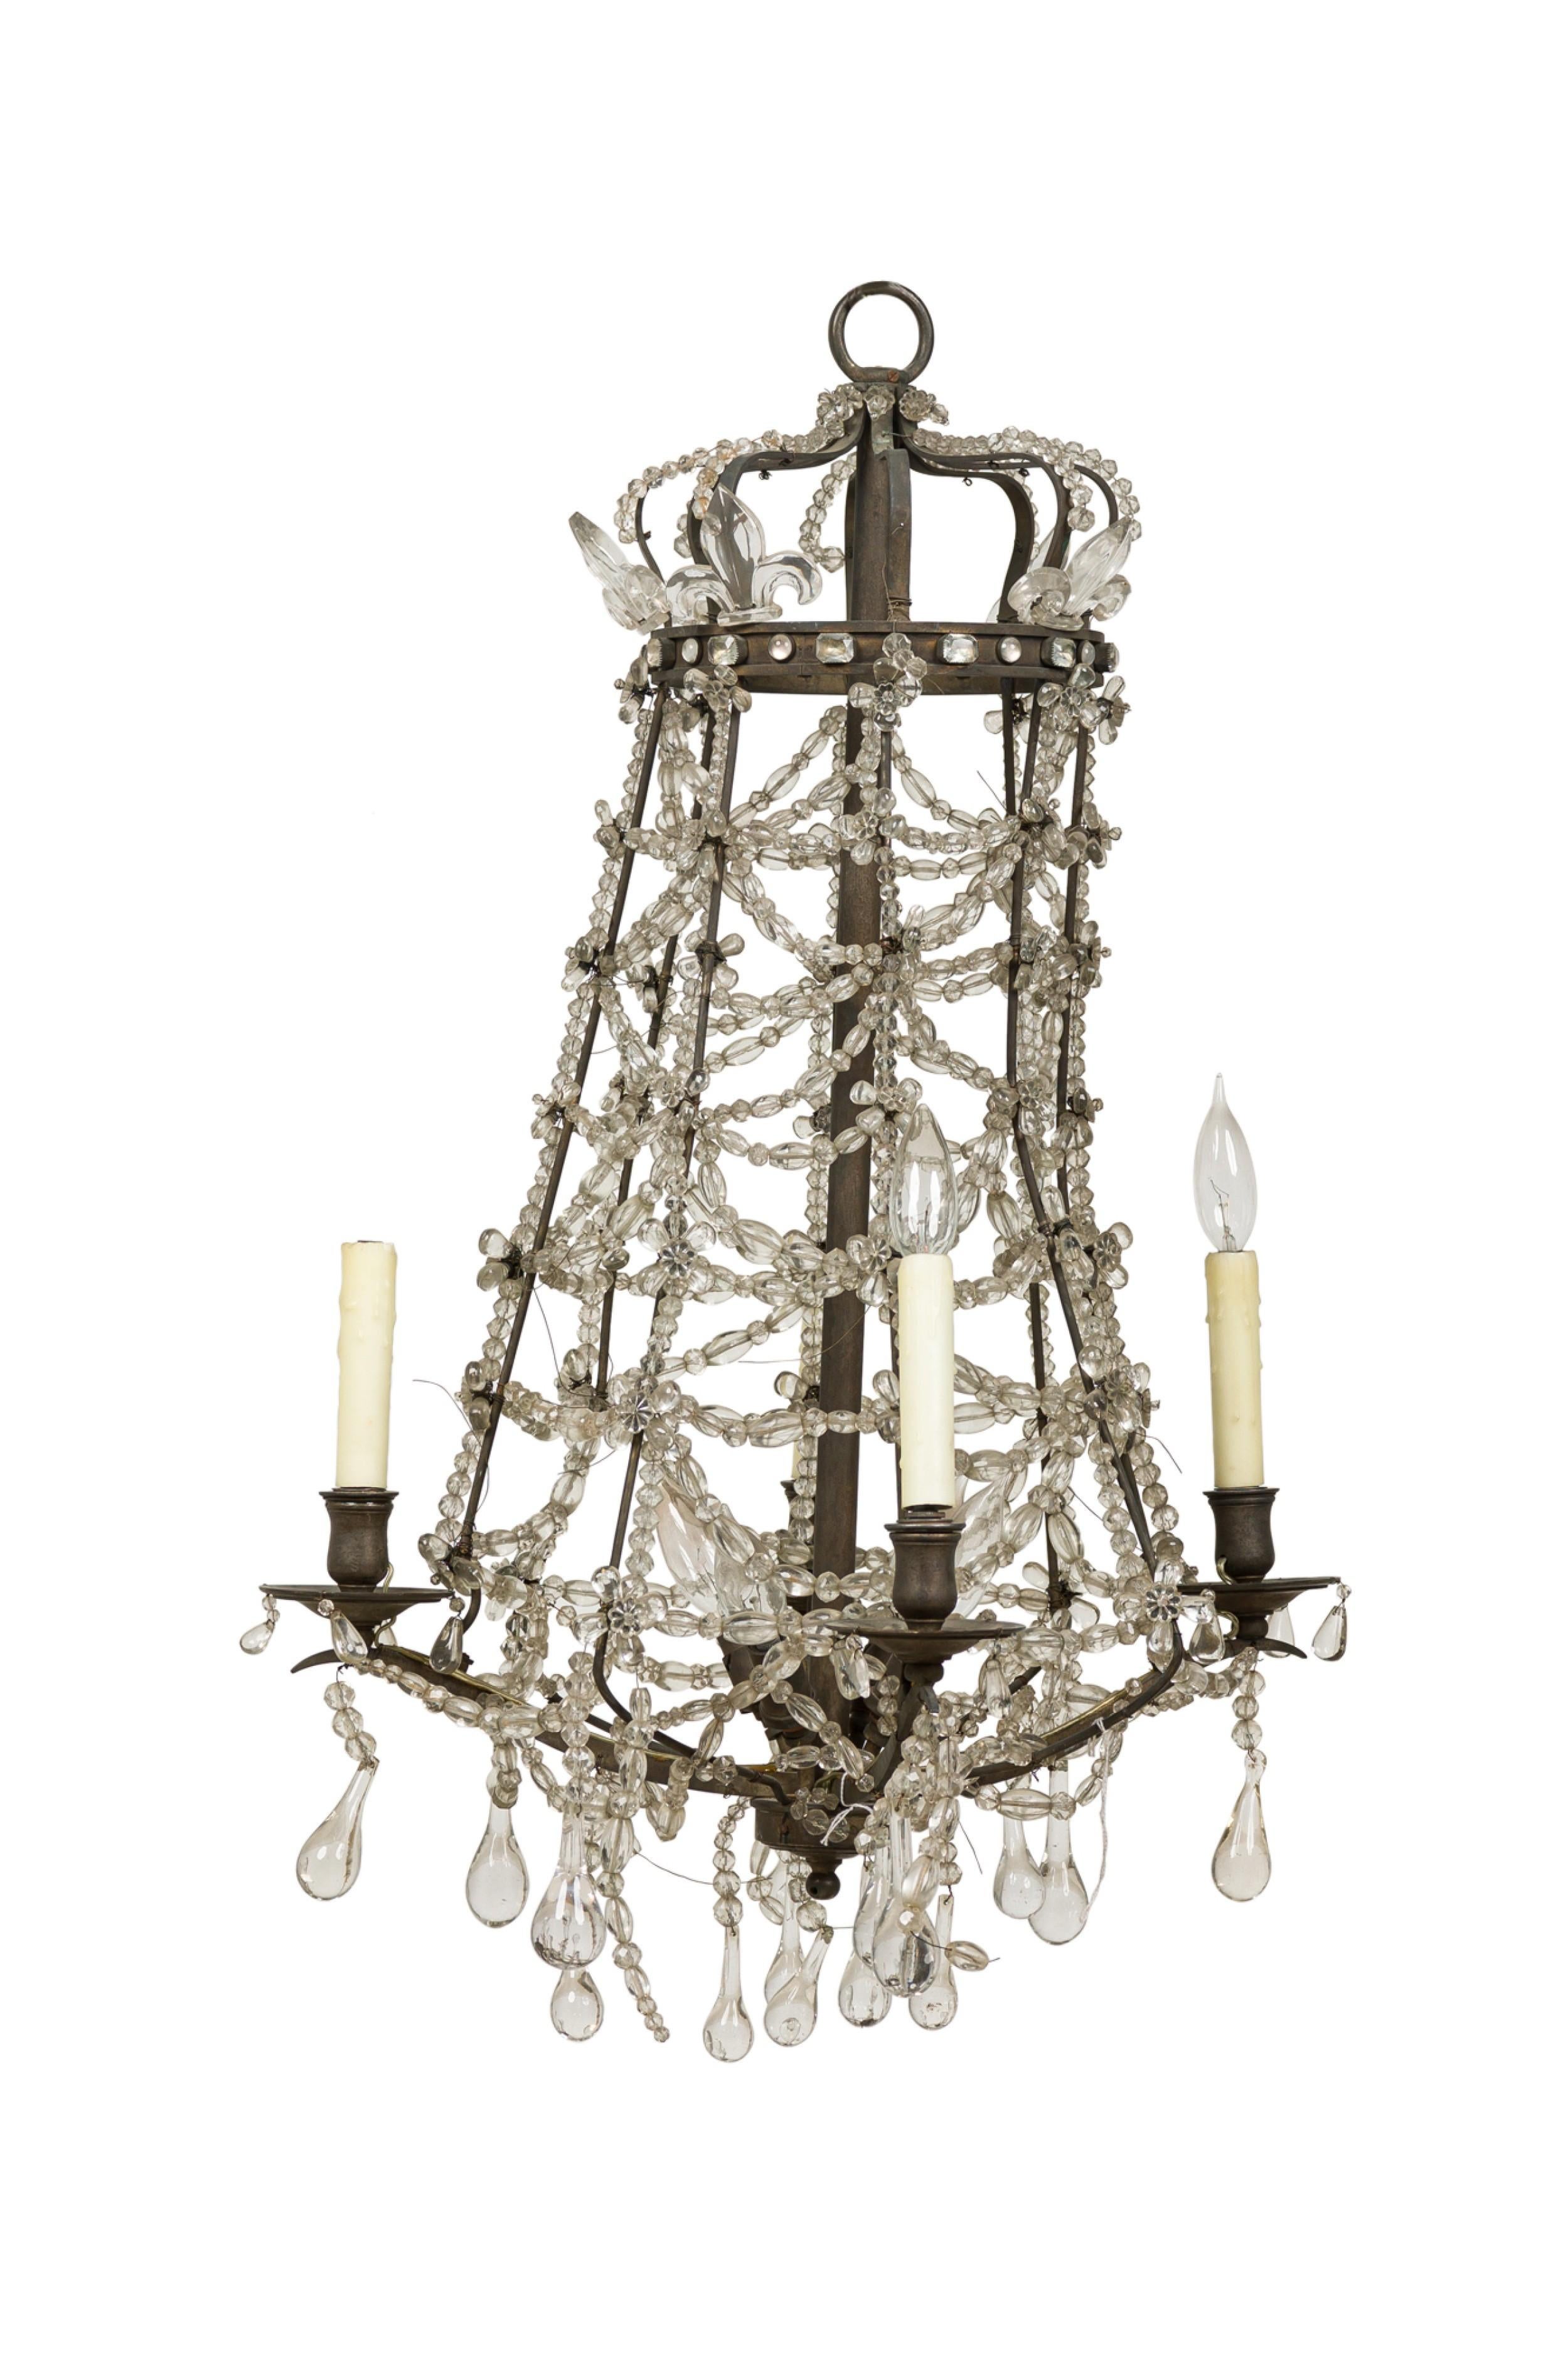 Swedish Neo-Classic (Early 19th Century) crystal chandelier with a tapered brass frame featuring a crown top, crystal Fleur-de-lis, beads and pendants, 4 arms with candelabra and 4 additional interior lights.
 

 Wear to finish.
